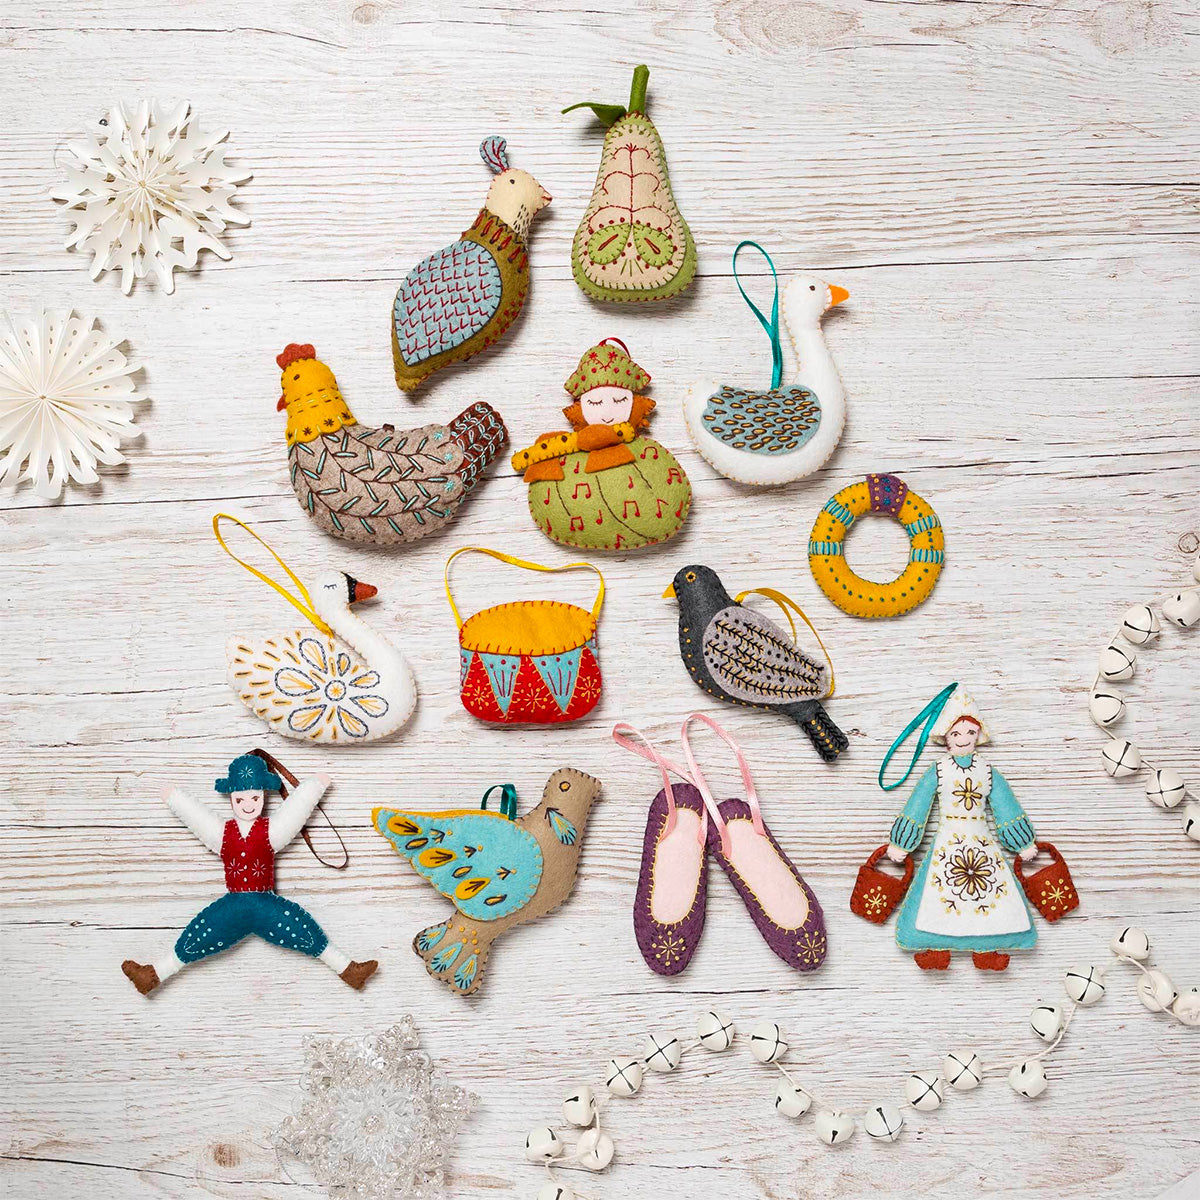 12 Days of Christmas Felt Ornament Kit - Goose-a-Laying